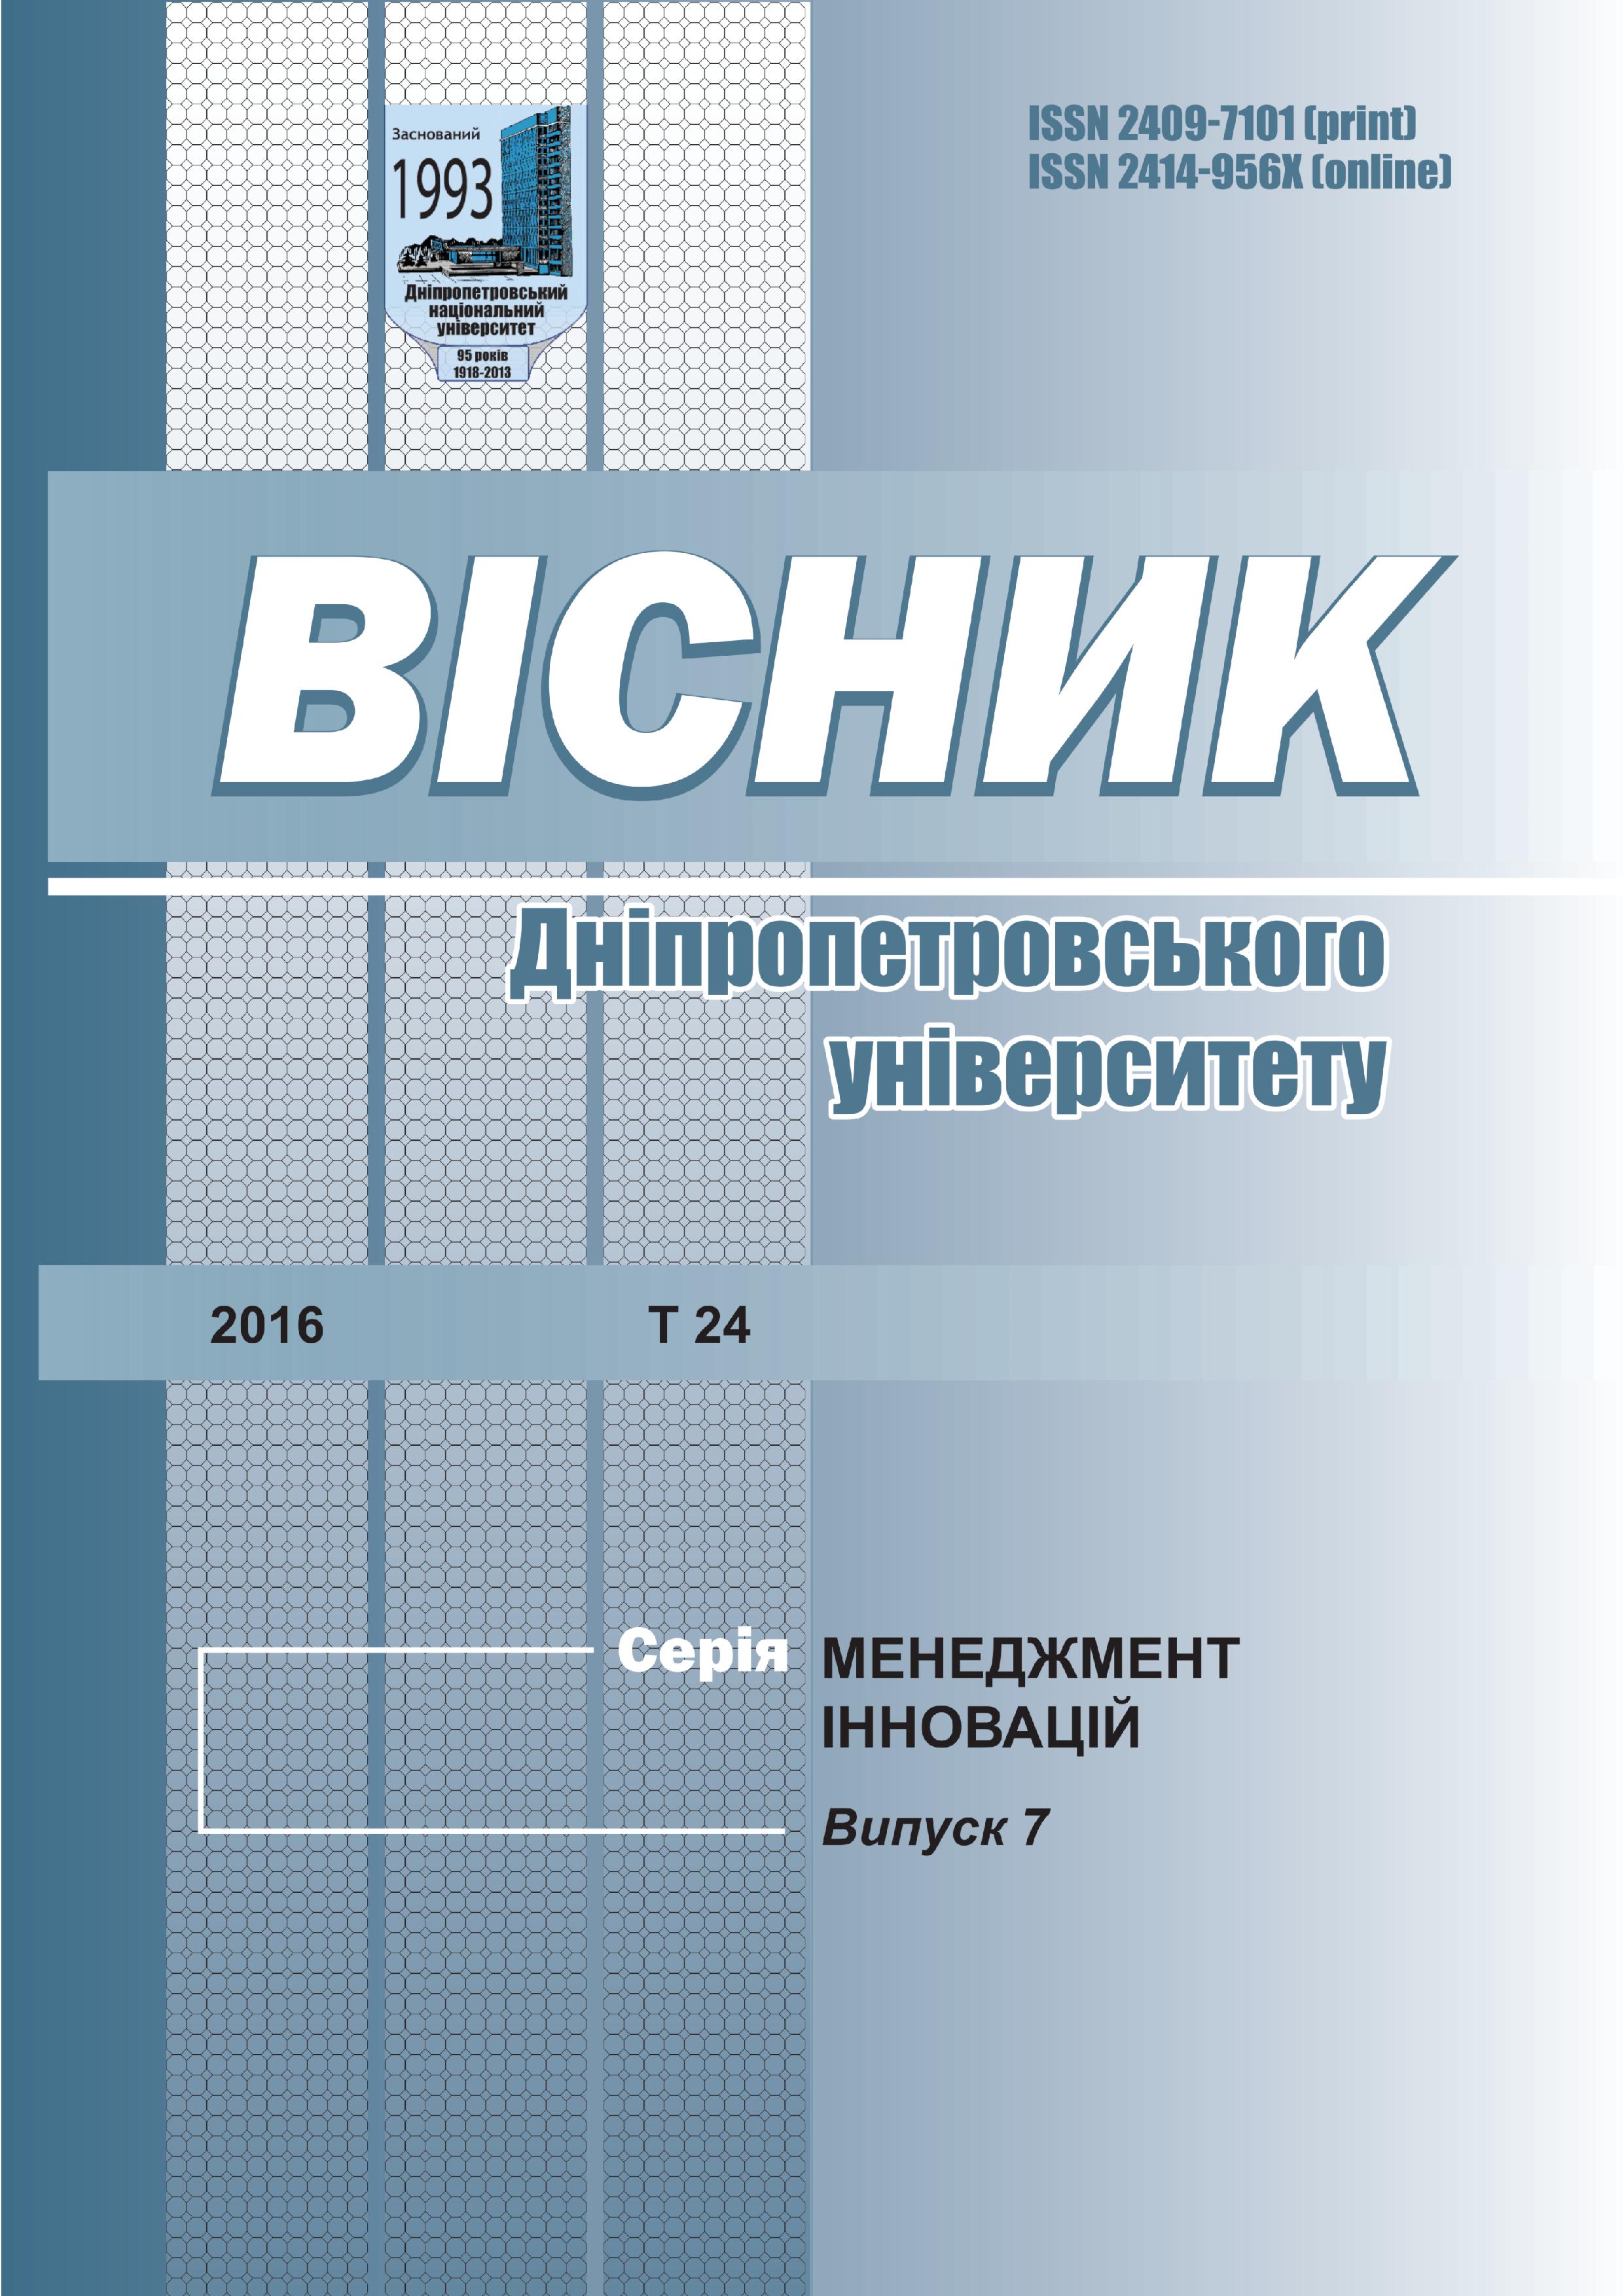 Development of methods for analysis of microenvironment of an enterprise on the example of establishment in the pharmacy industry Cover Image